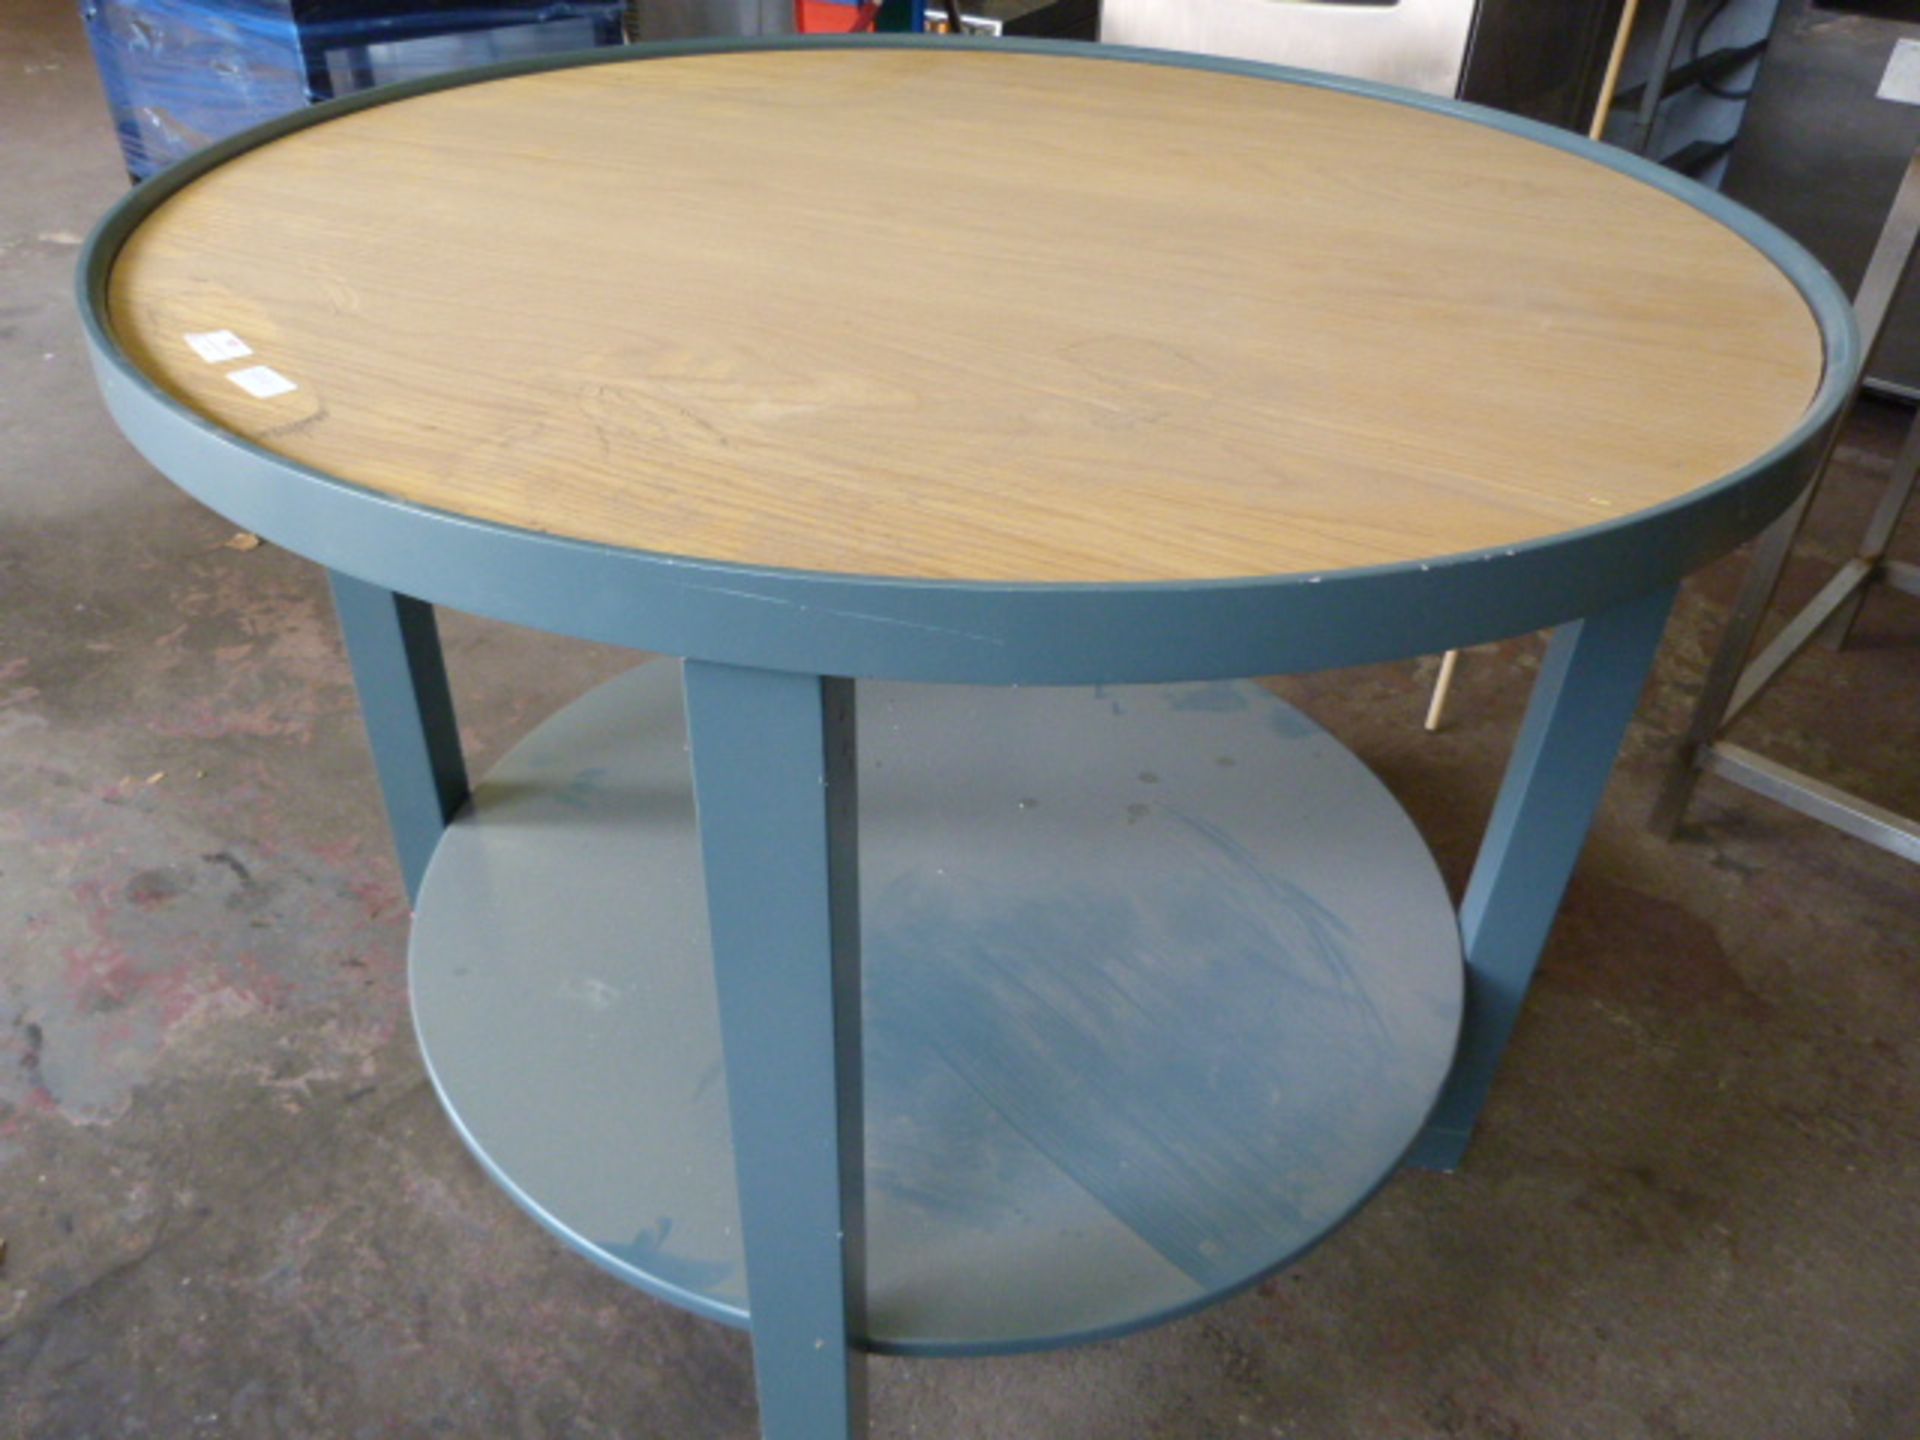 *Painted Round Table with Shelf & Wood Effect Top 1.03m Diameter x 86cm High